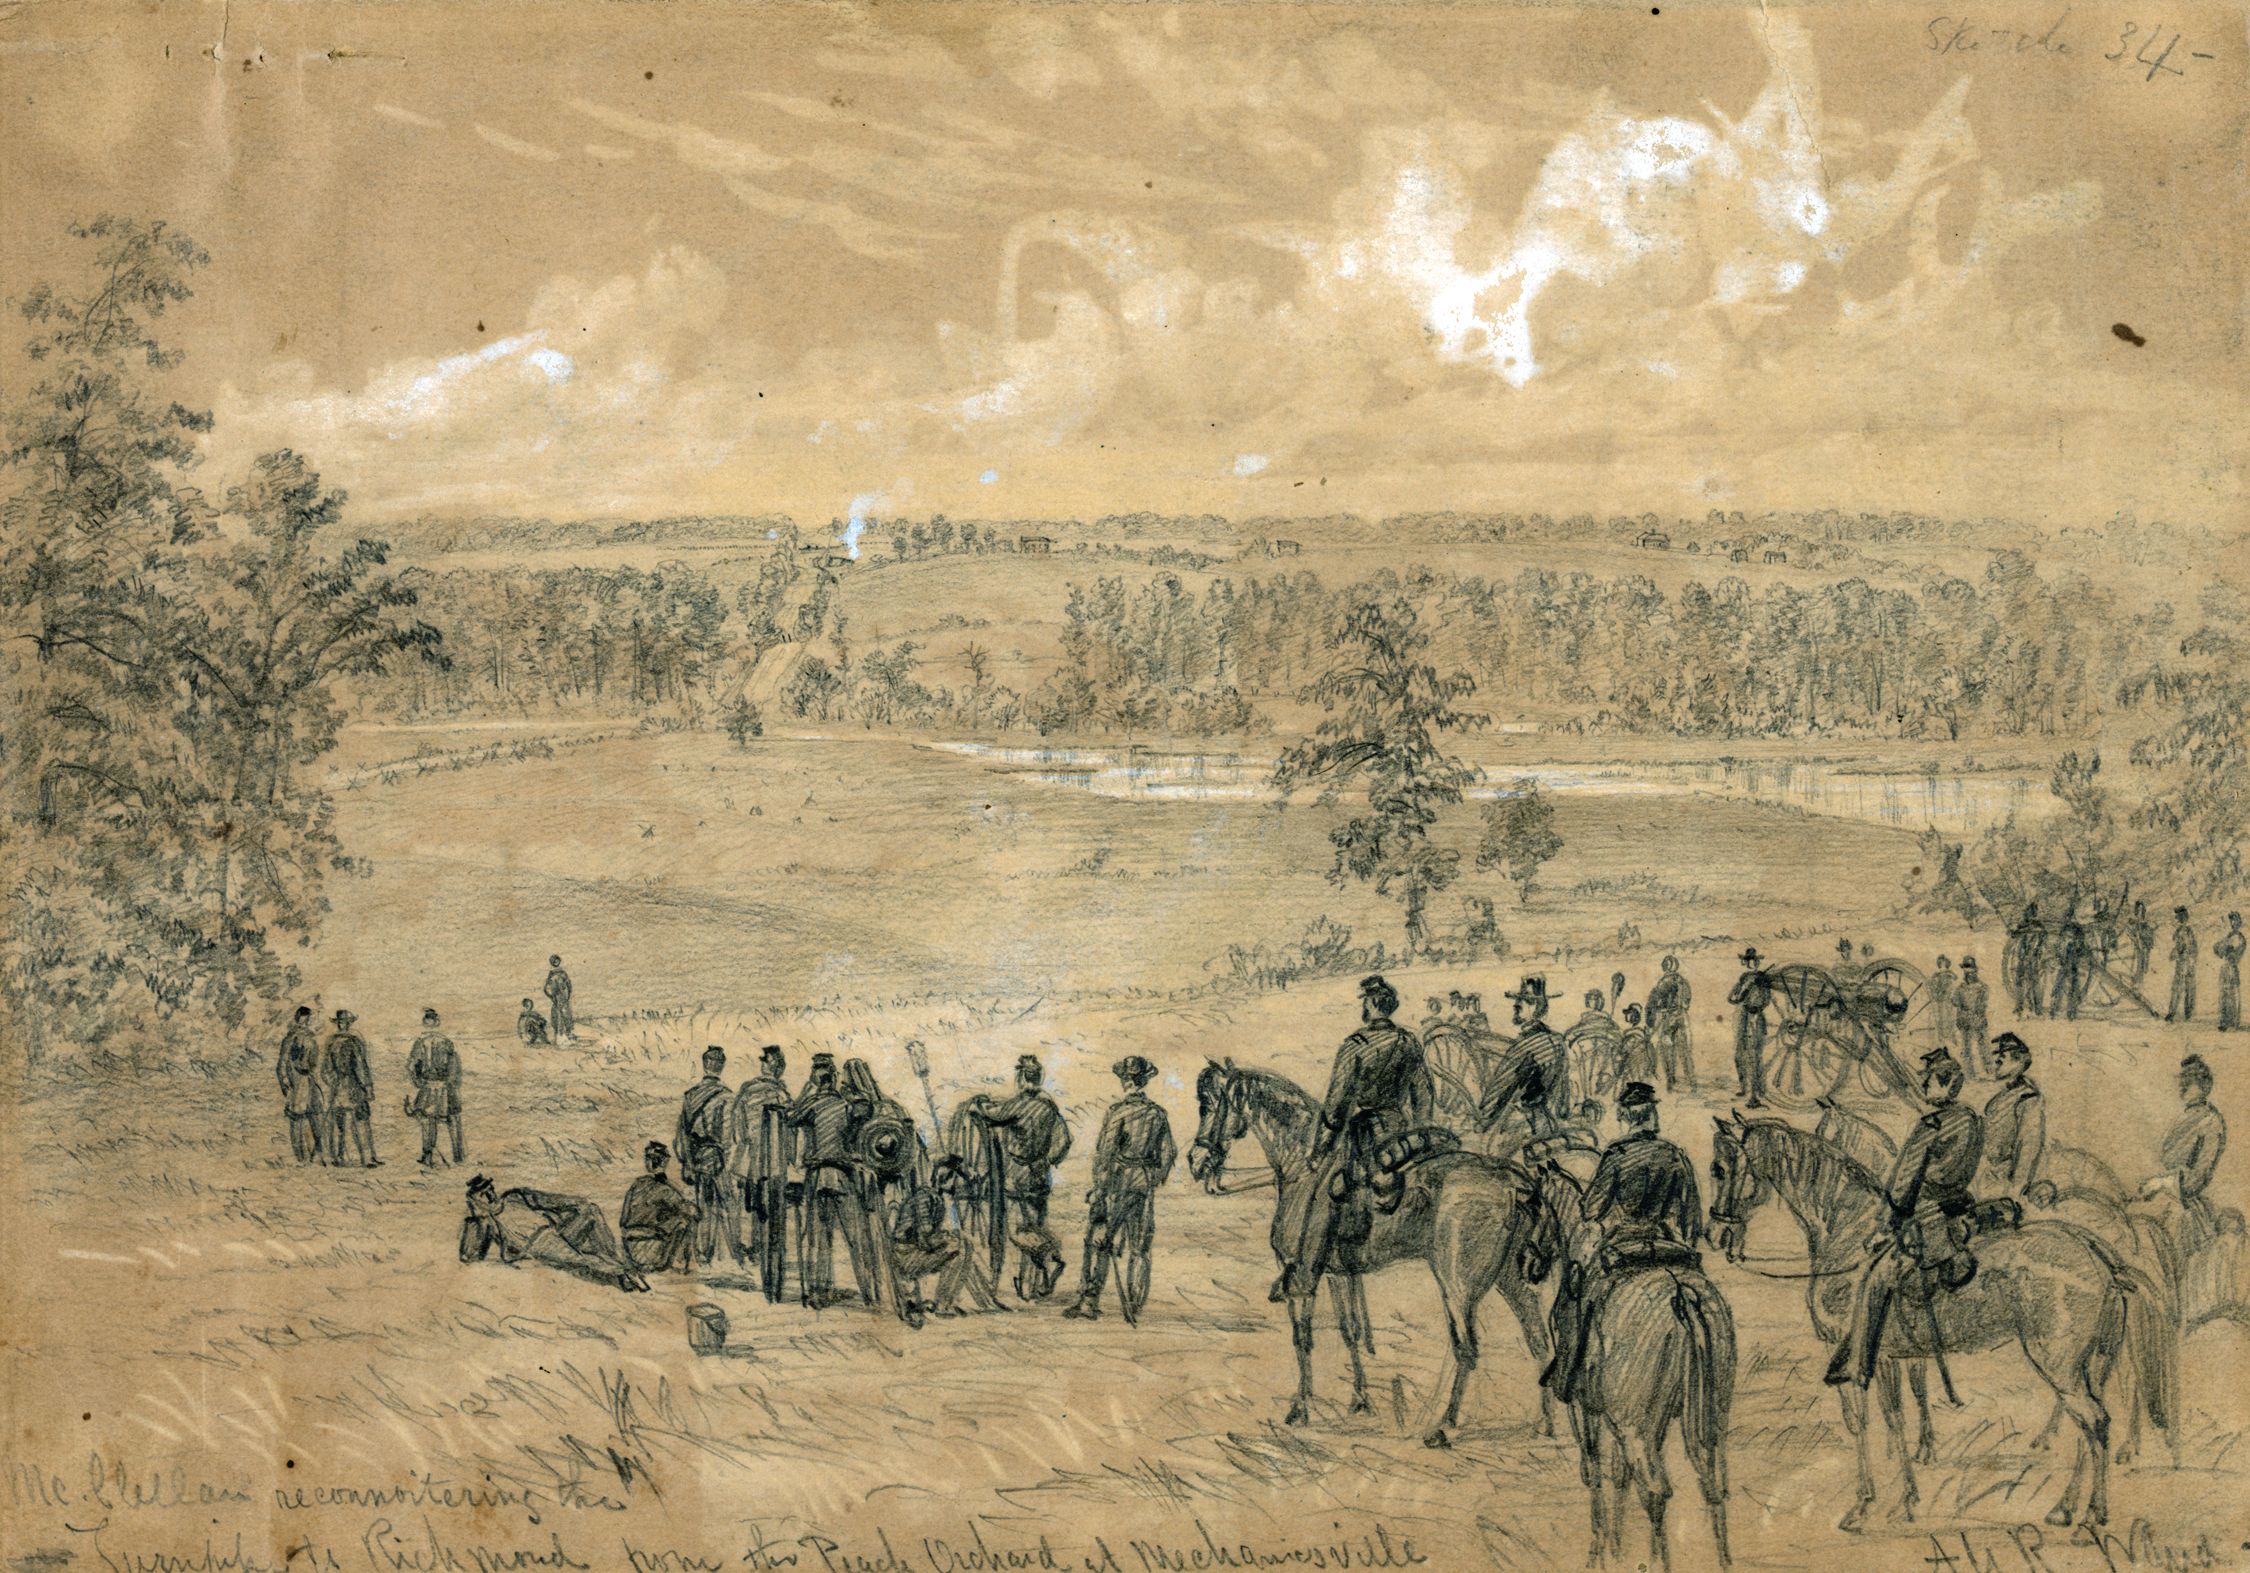  Maj. Gen. George B. McClellan, commander of the Army of the Potomac, surveys the approach to Richmond during the Battle of Mechanicsville. General Robert E. Lee’s offensive put Union forces on the north bank of the Chickahominy River in danger of destruction.